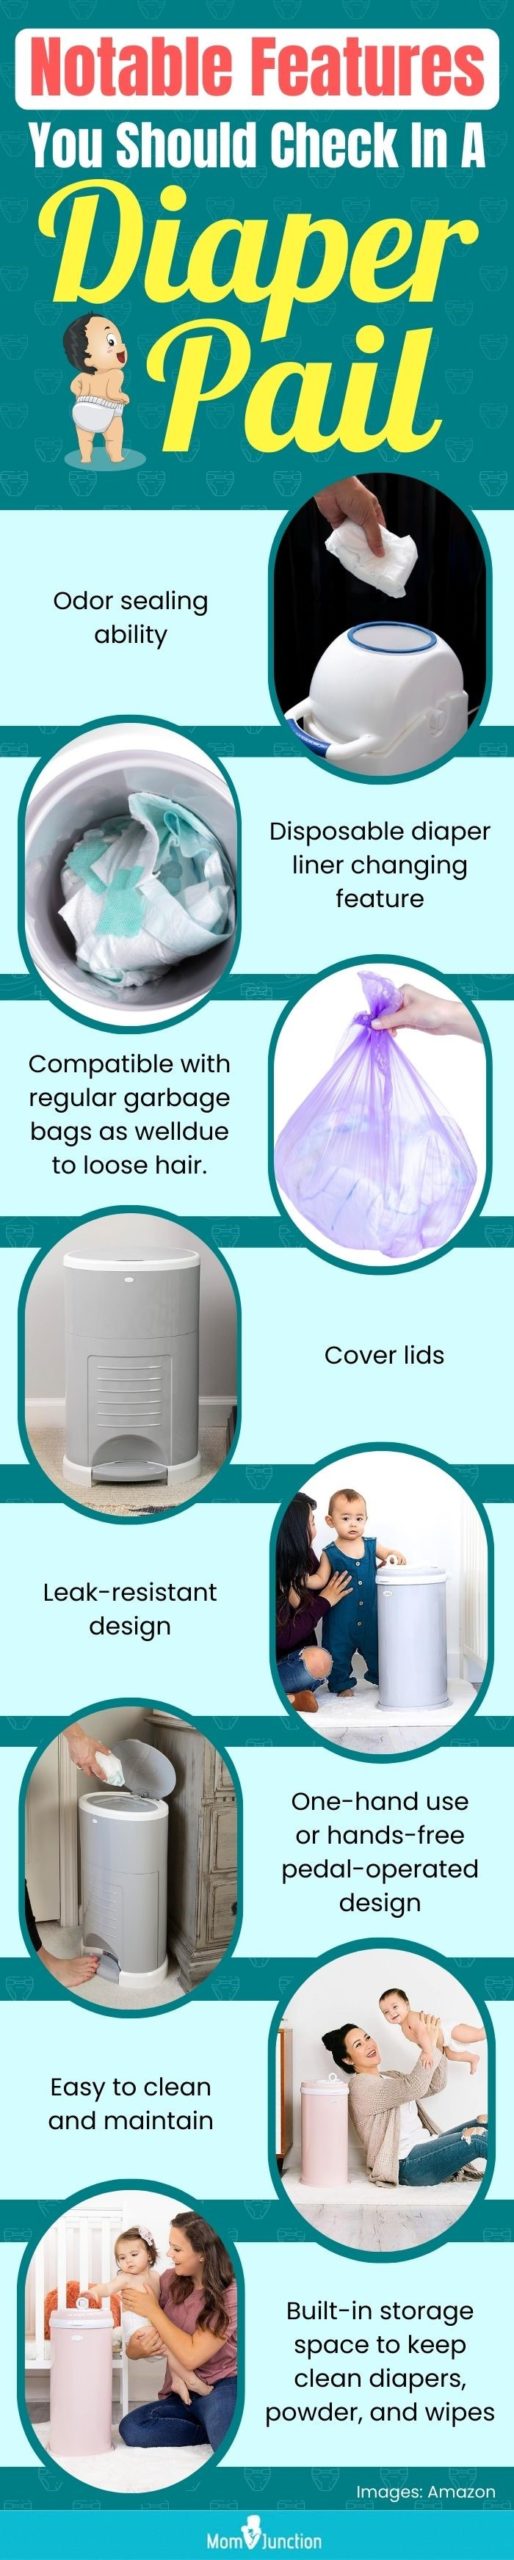 Notable Features You Should Check In A Diaper Pail (infographic)